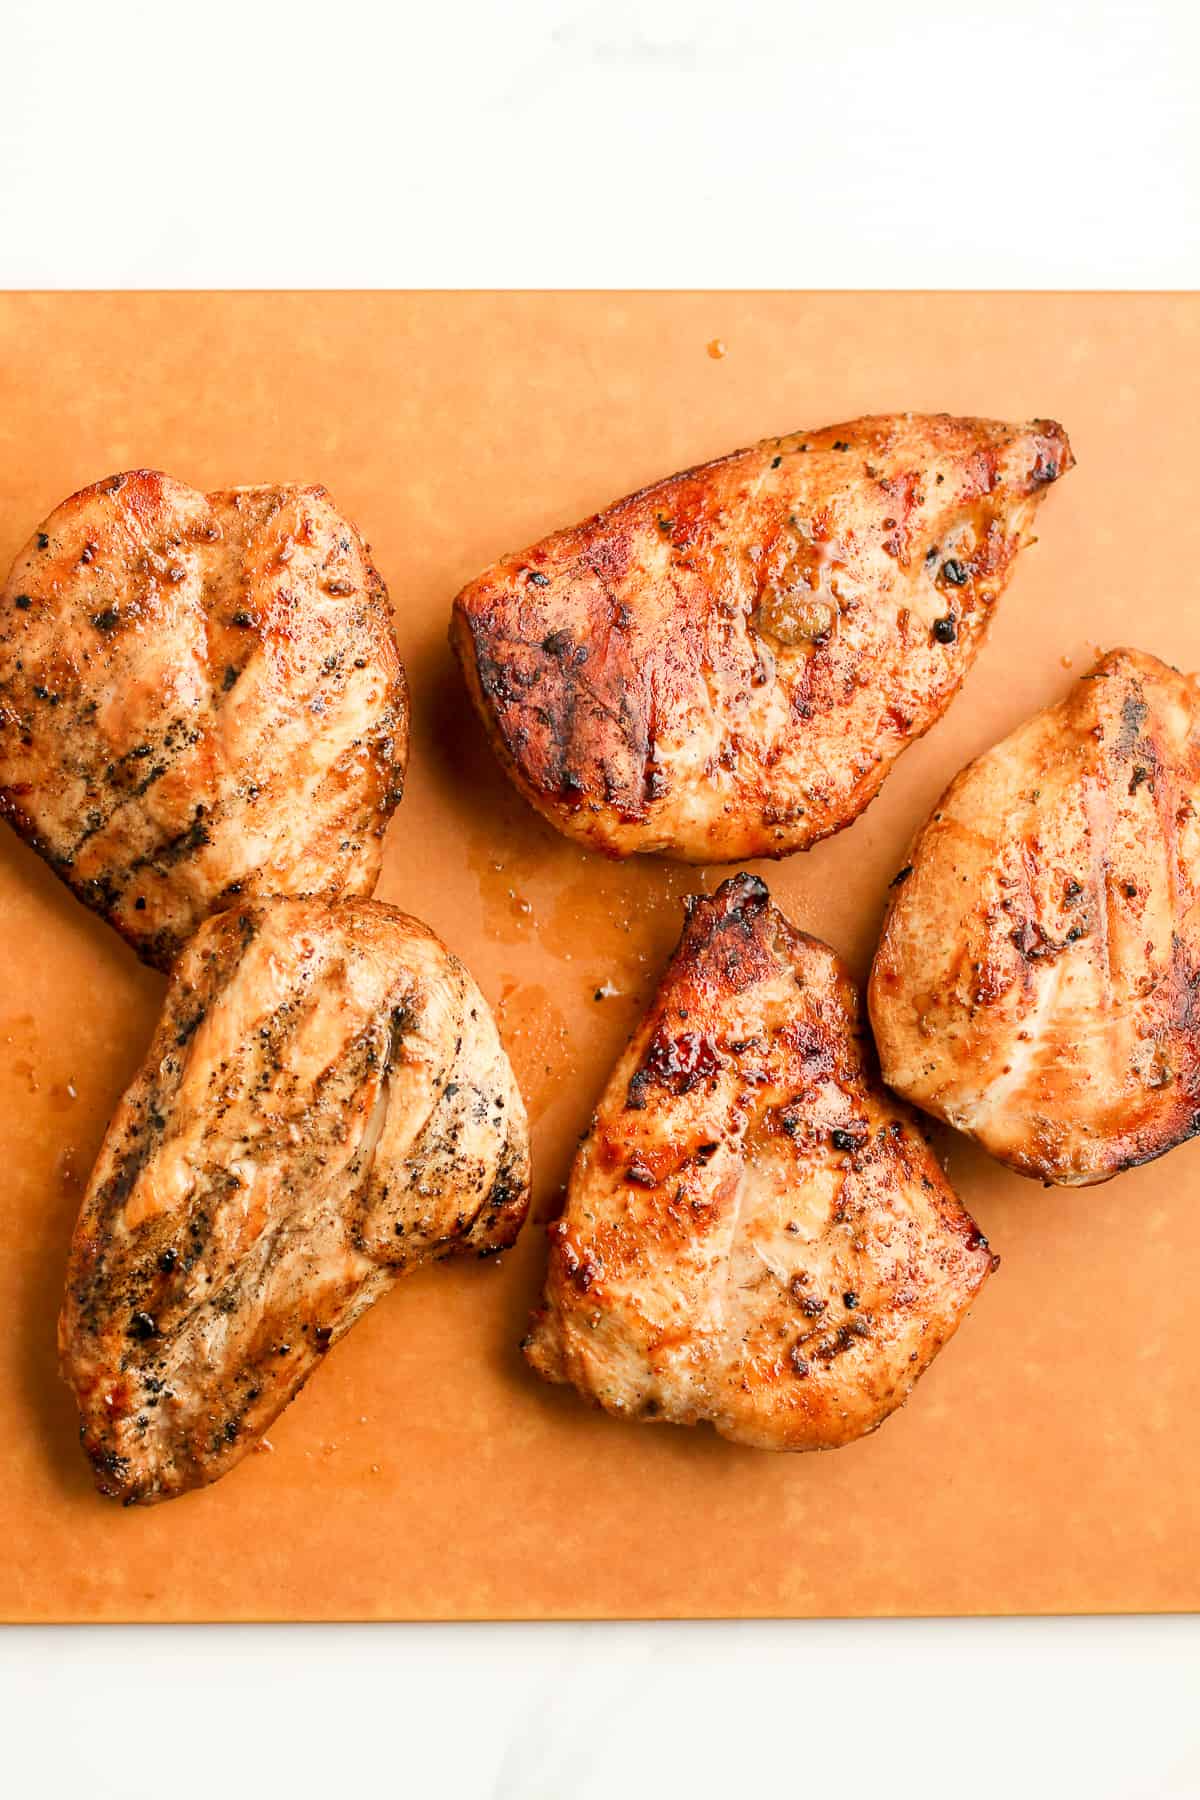 A board of the grilled chicken breasts.